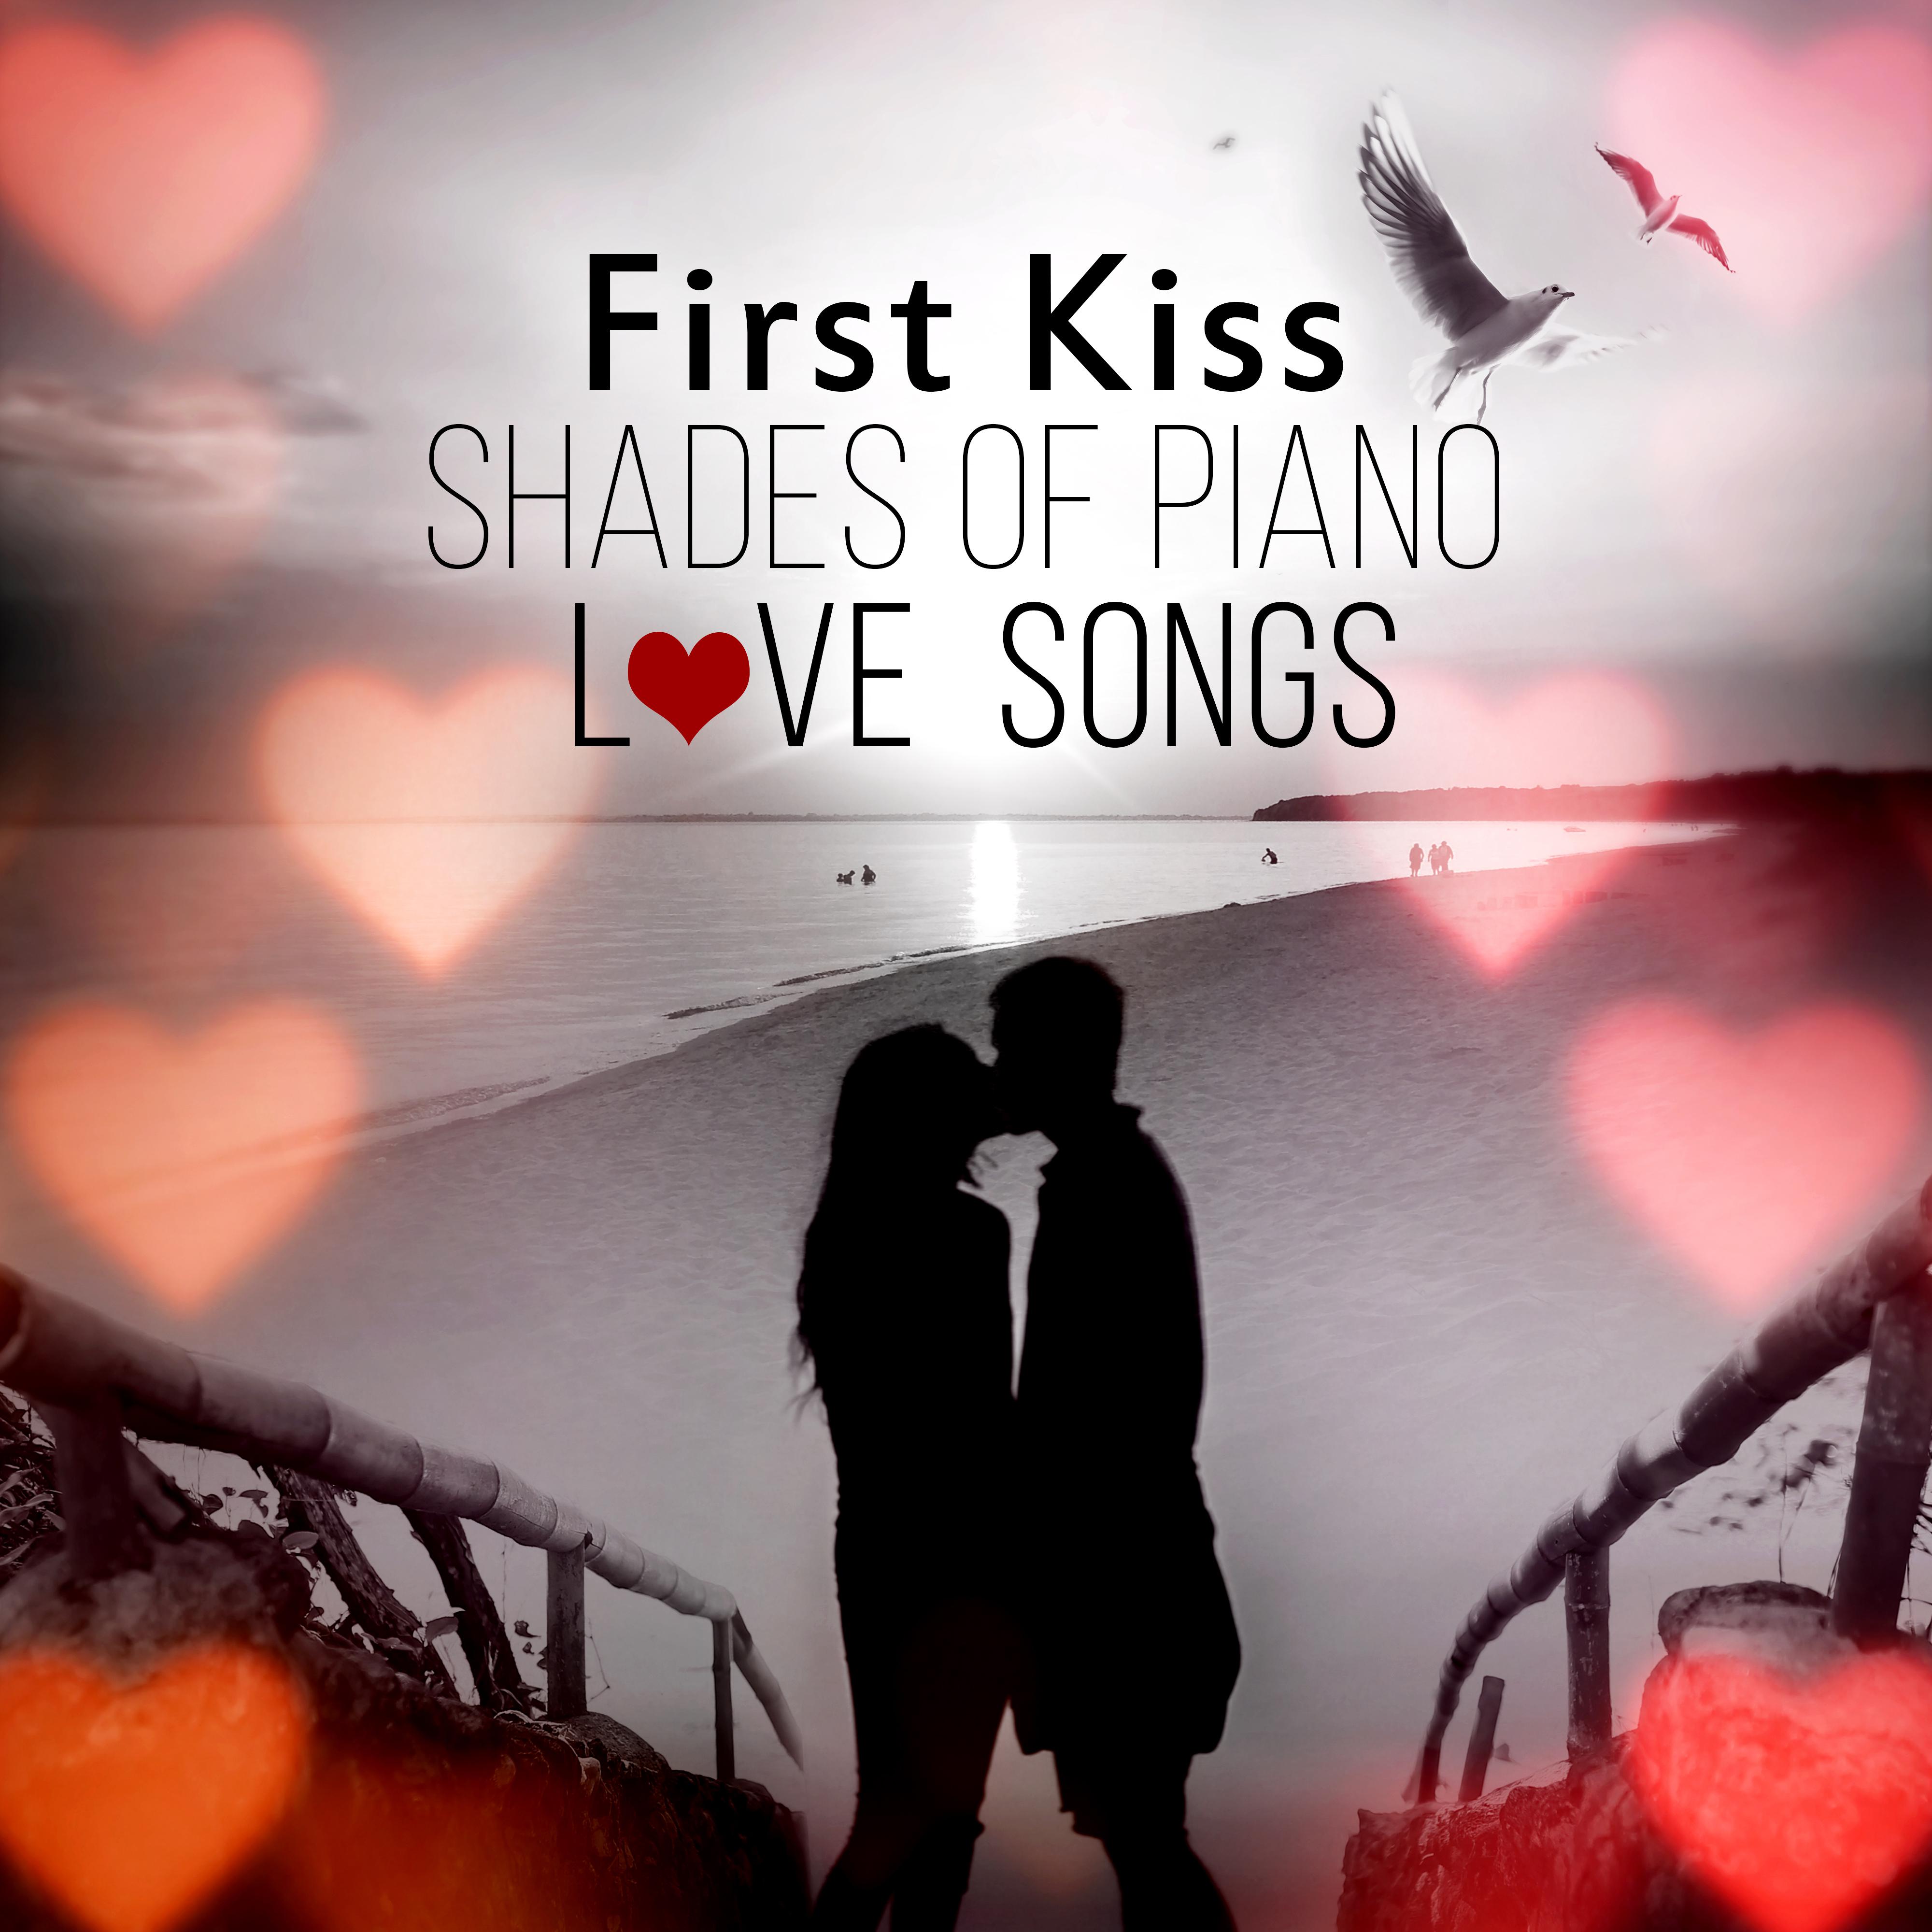 First Kiss – Shades of Piano Love Songs, Love Making Music, Candle Light Dinner for Two, Piano Bar & Smooth Jazz Lounge